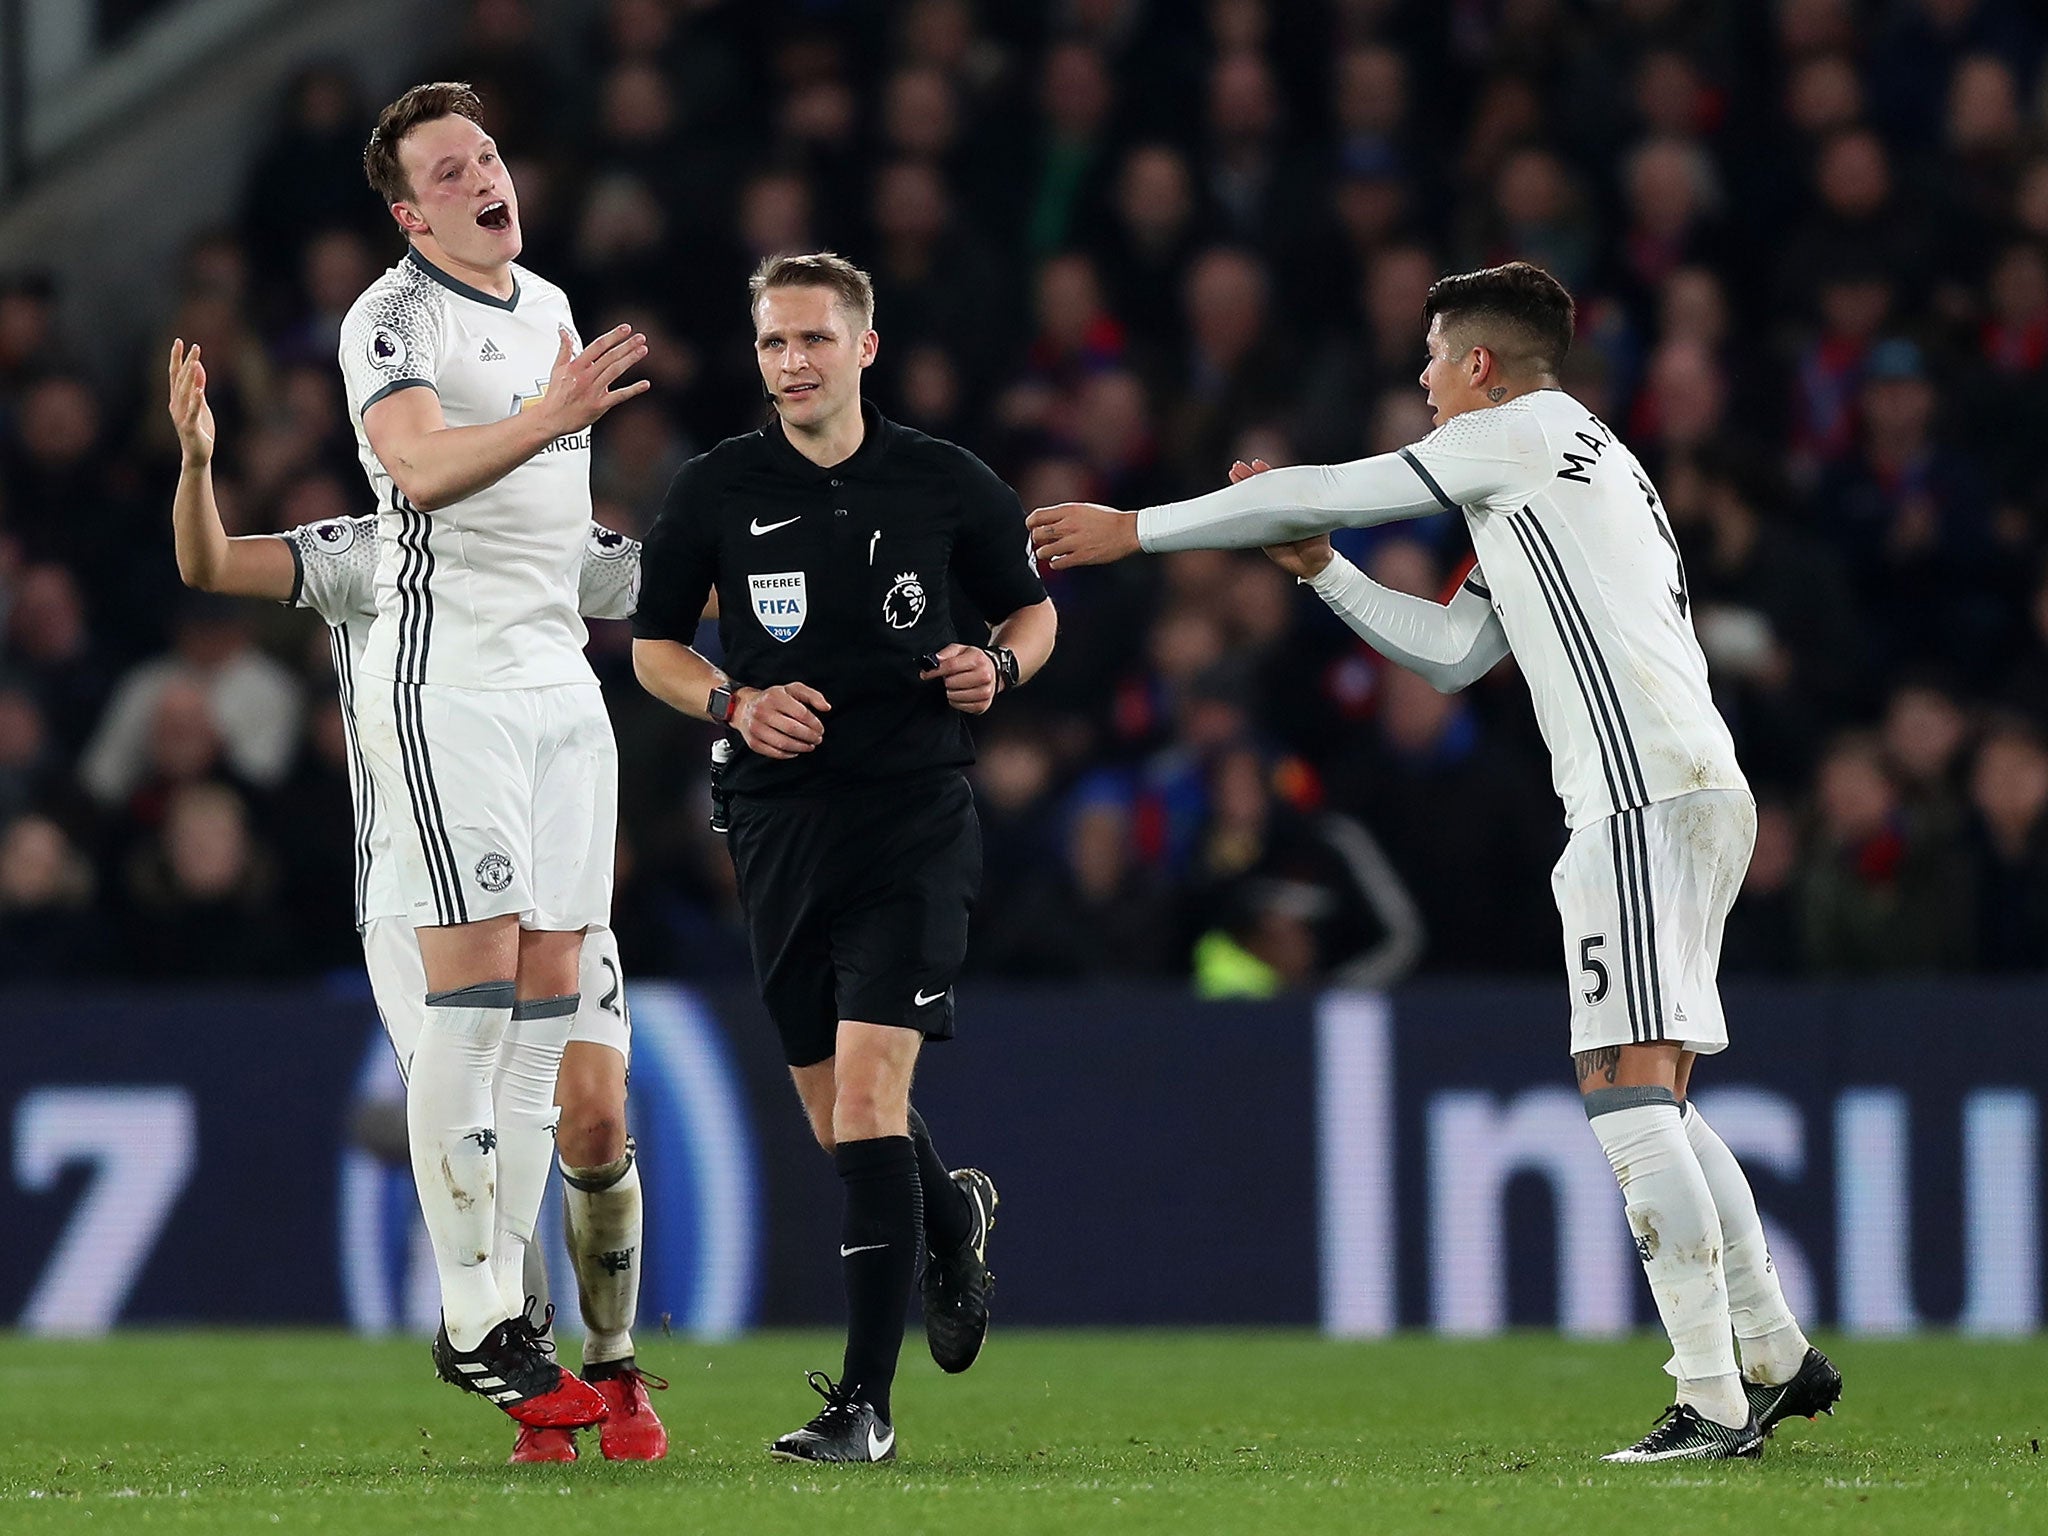 Referee Craig Pawson and his officials endured a difficult night at Selhurst Park